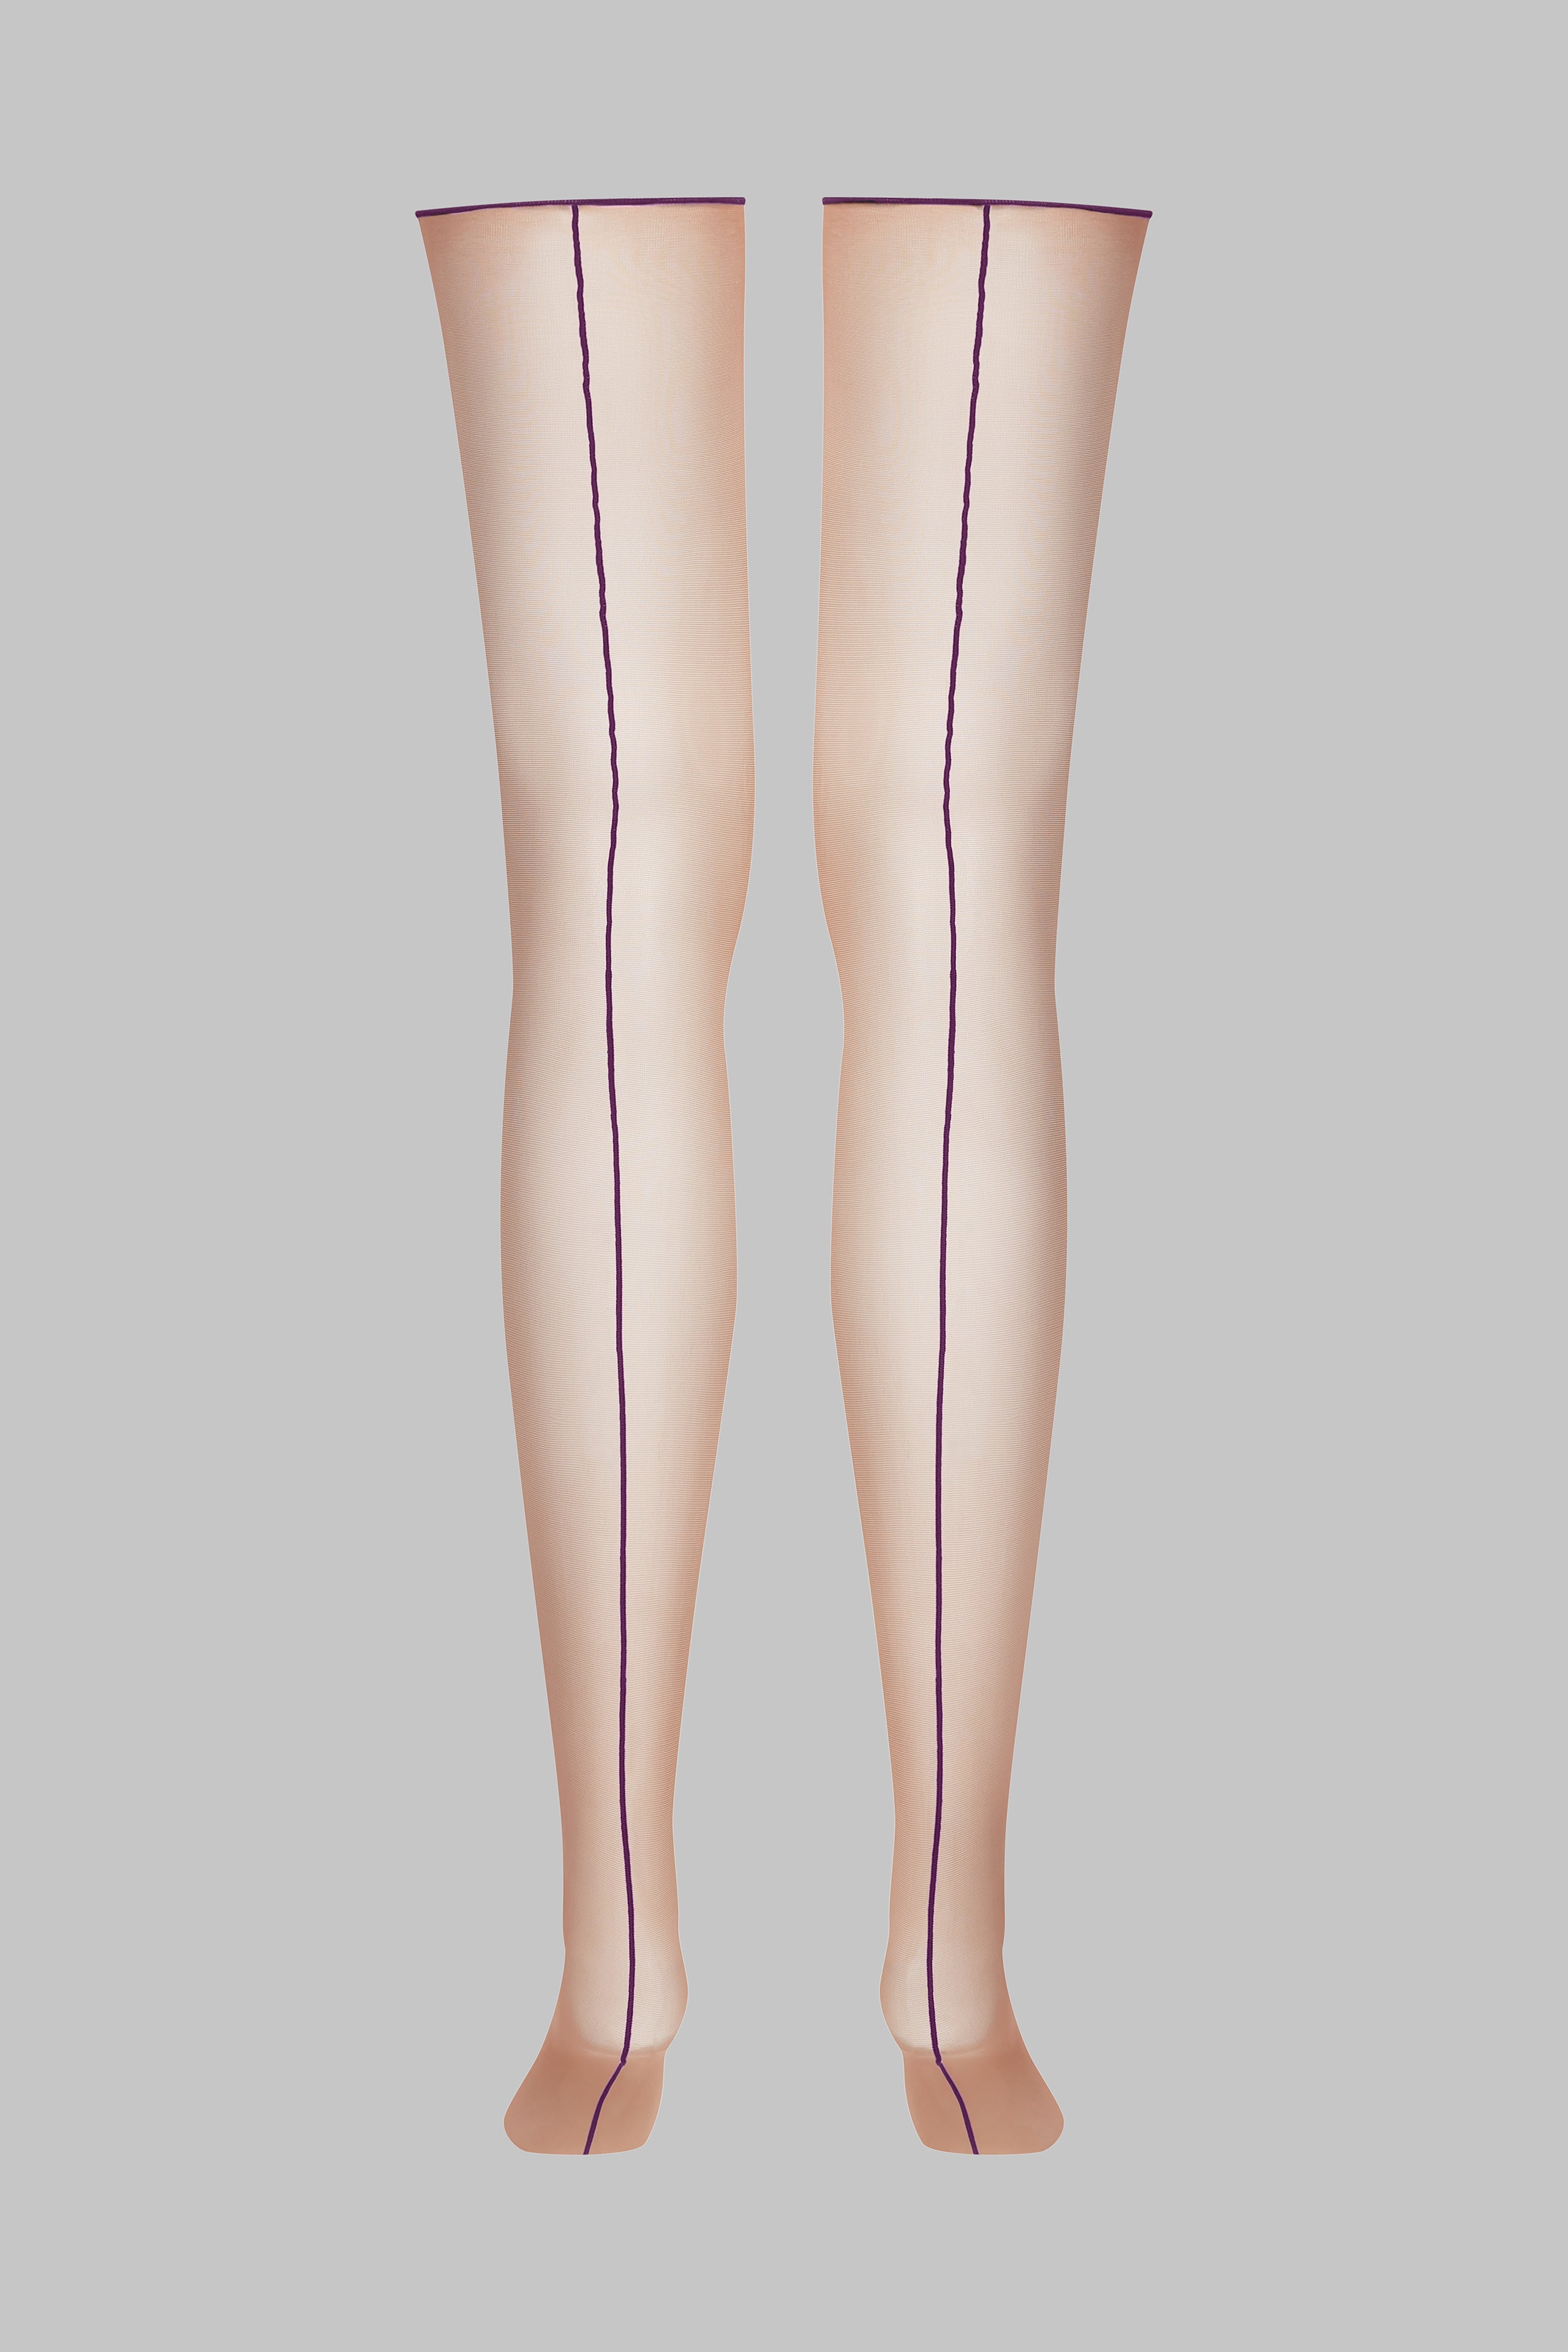 Cut and curled back seamed stockings - 20D